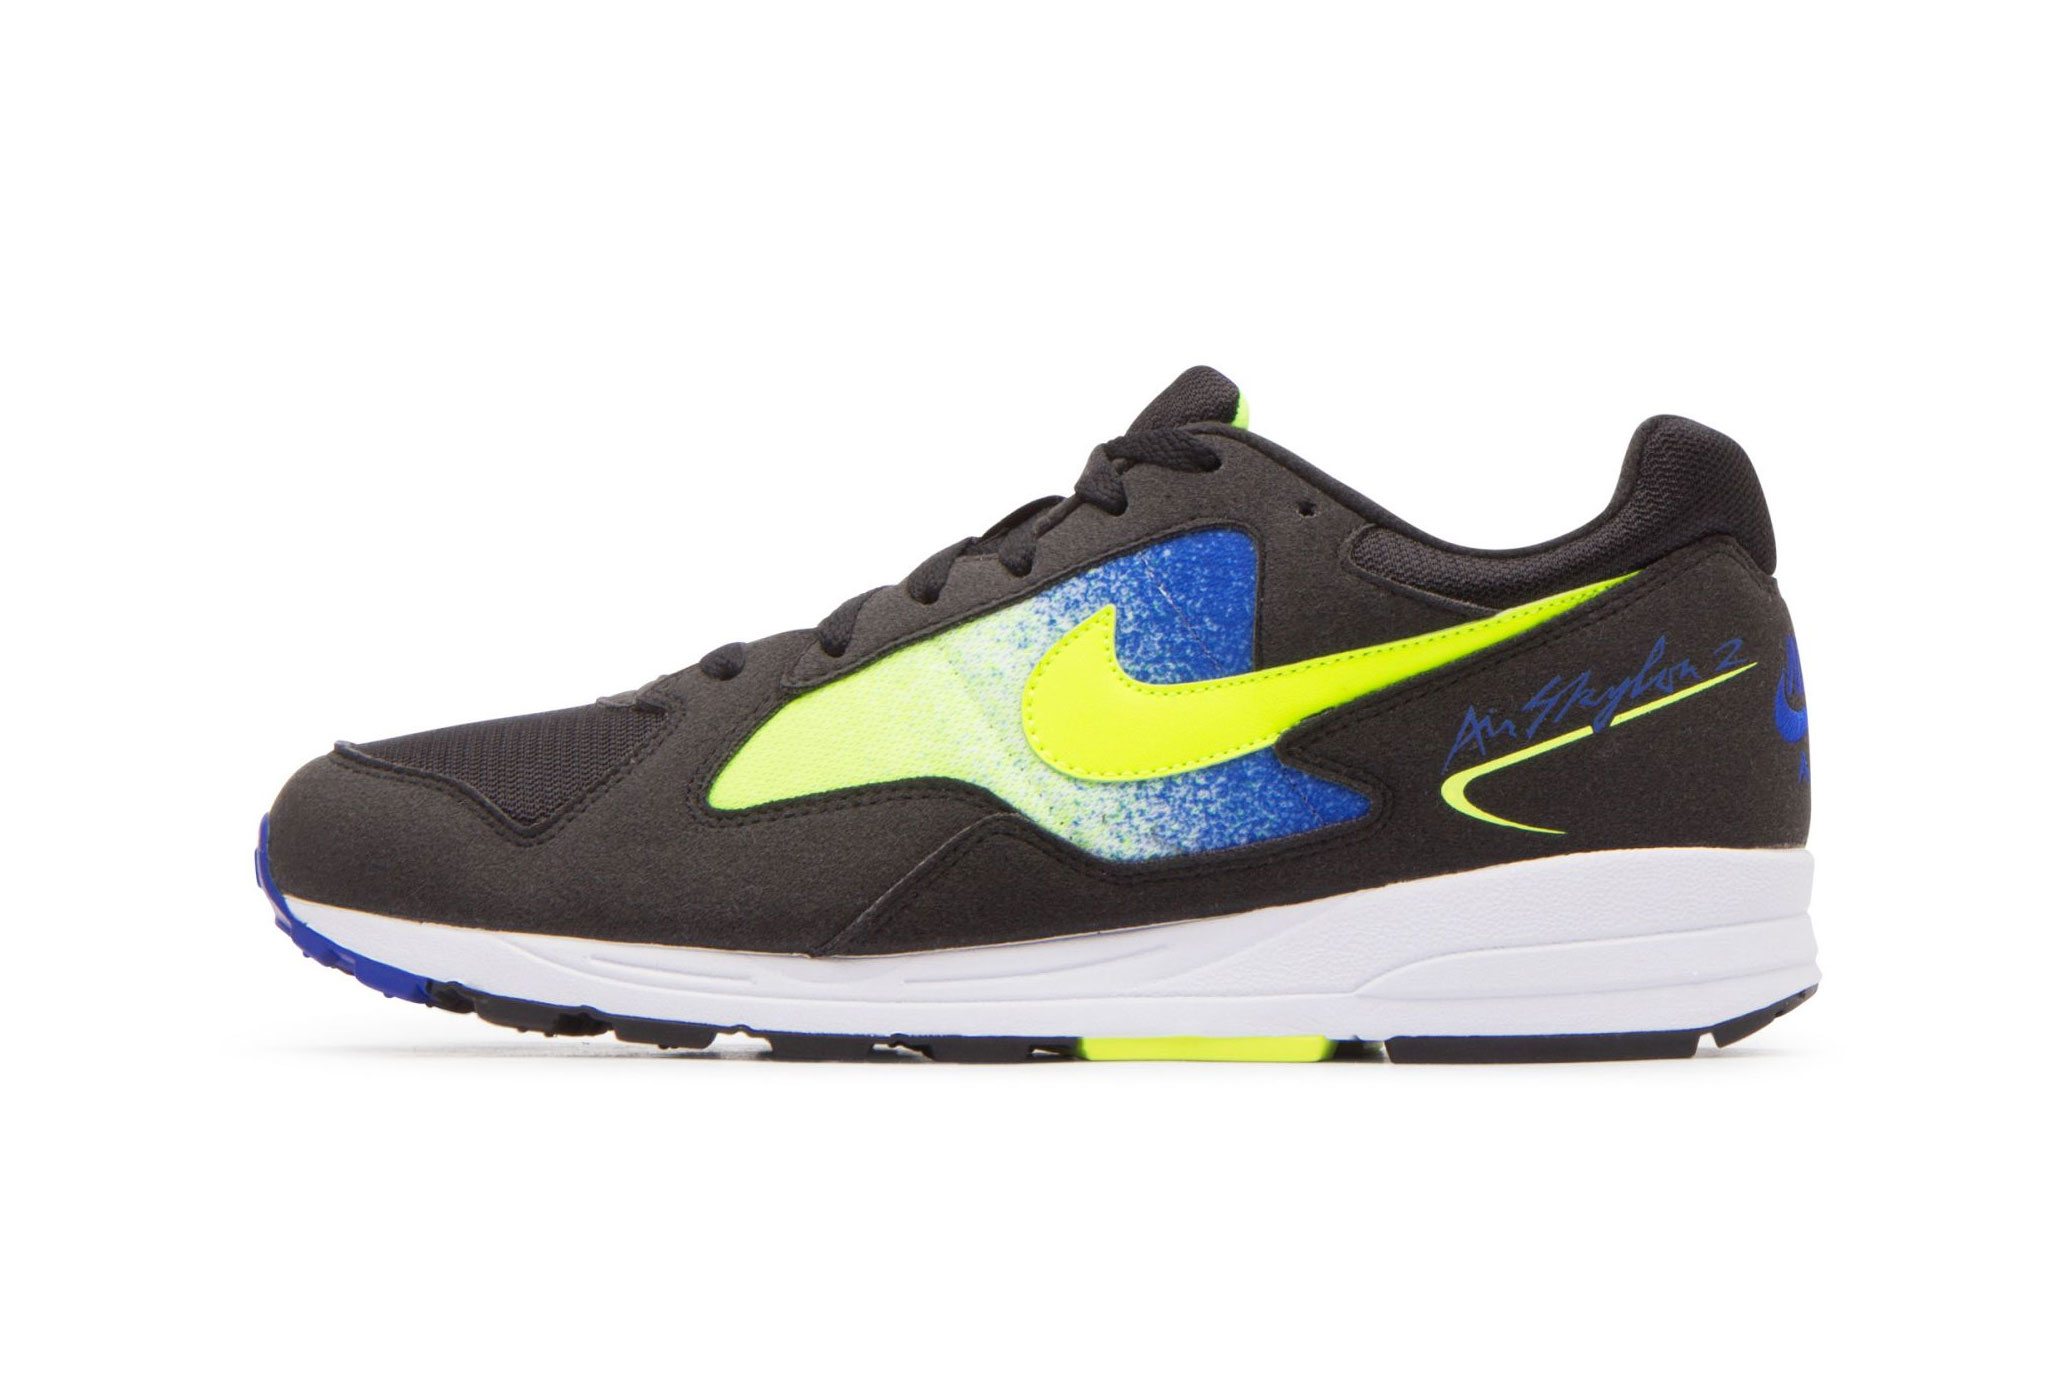 Nike Air Skylon 2 "Volt/Racer Blue" release date info price purchase sneaker colorway